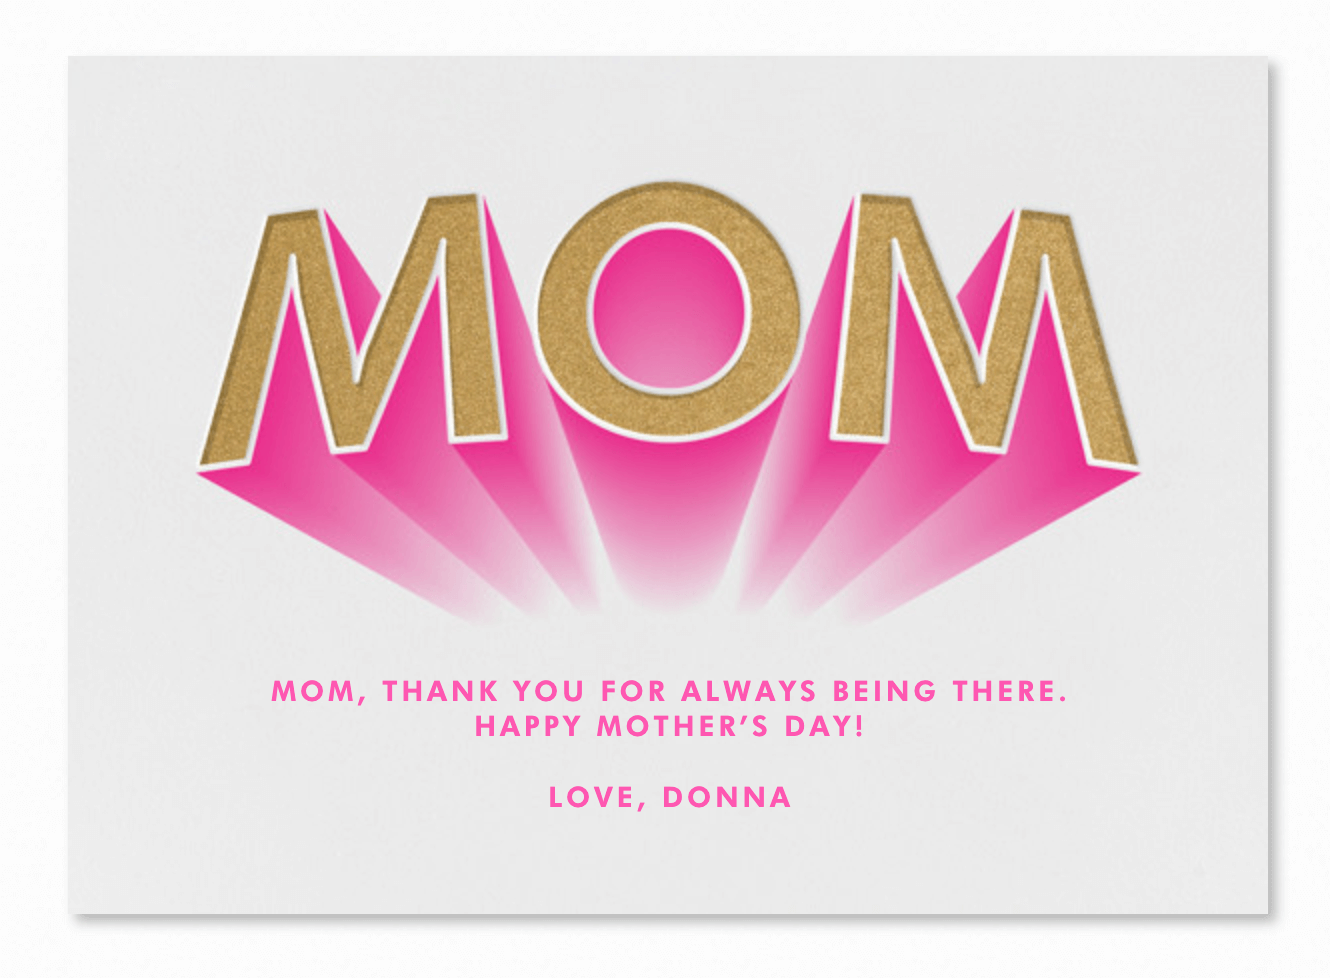 Louis Vuitton Is Offering a Custom Free E-Card for Mother's Day